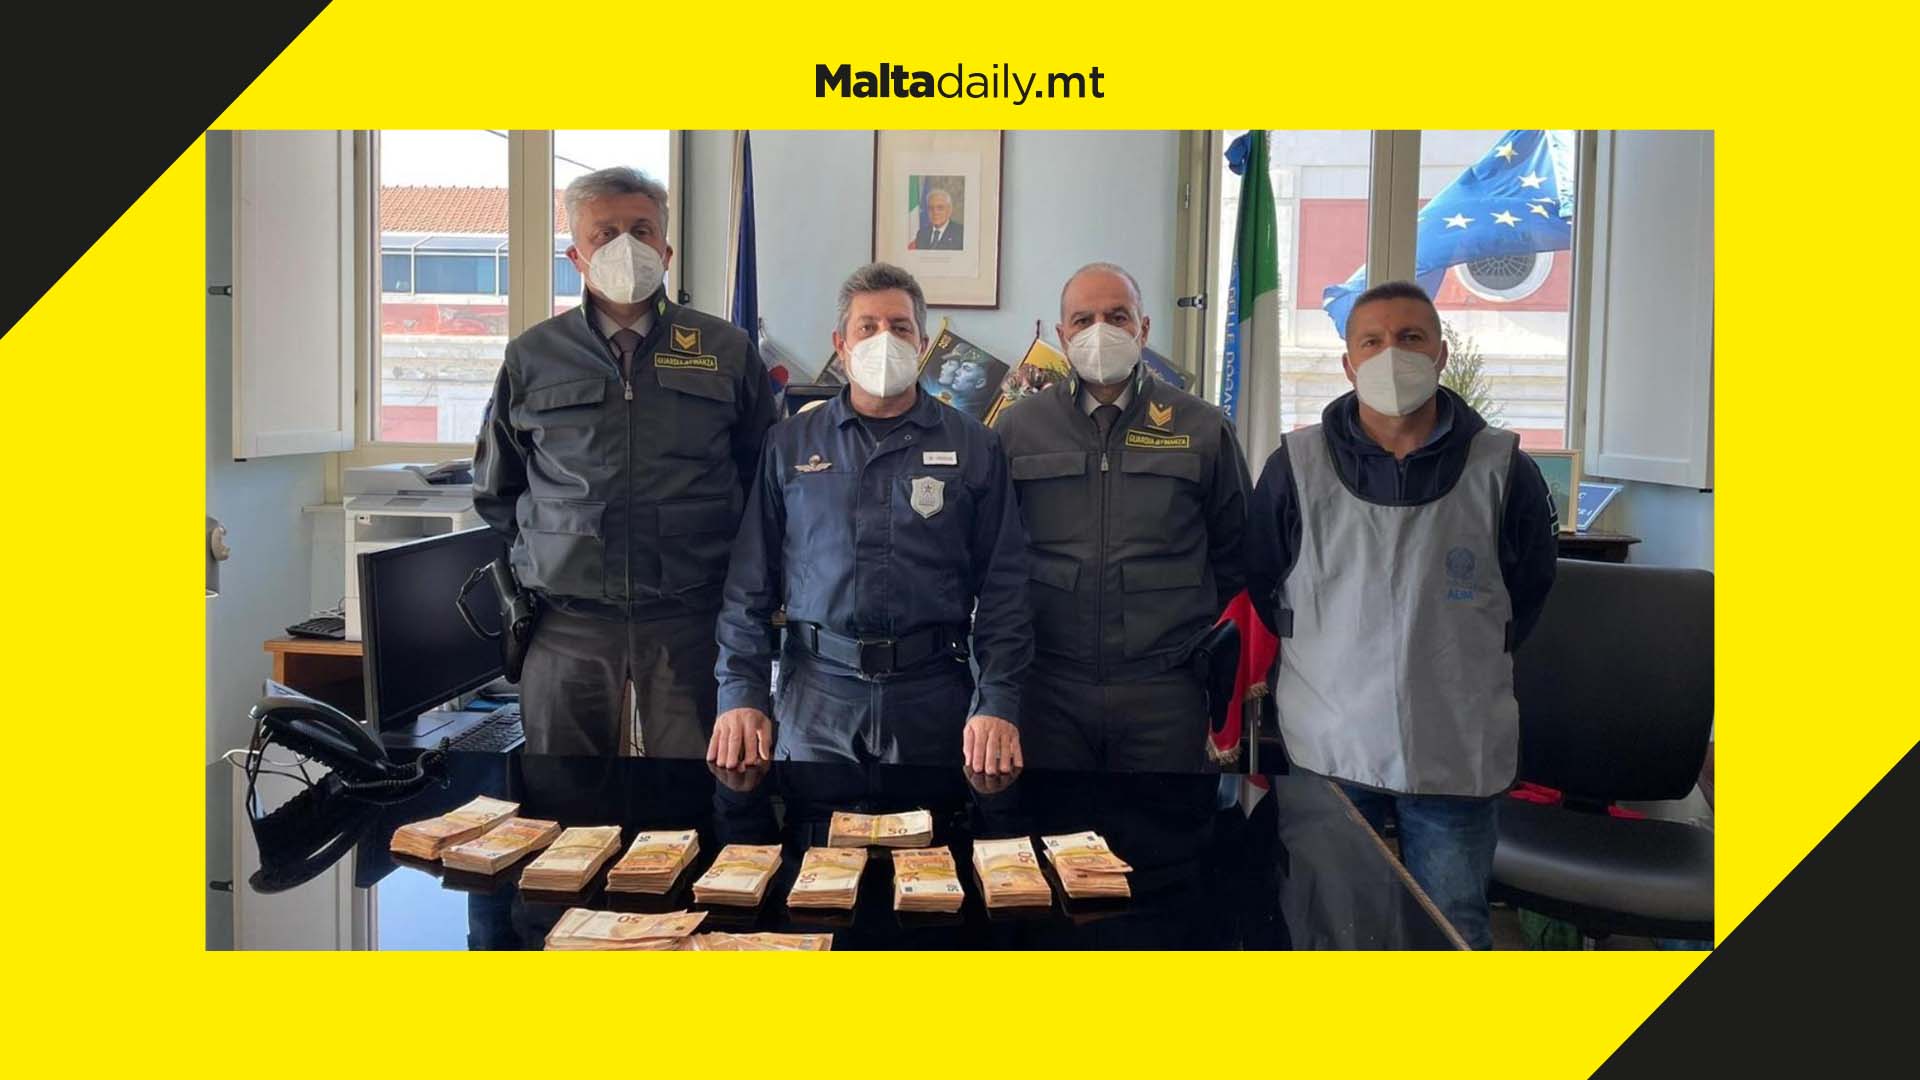 Attempt to smuggle €115,000 into Italy by Maltese man